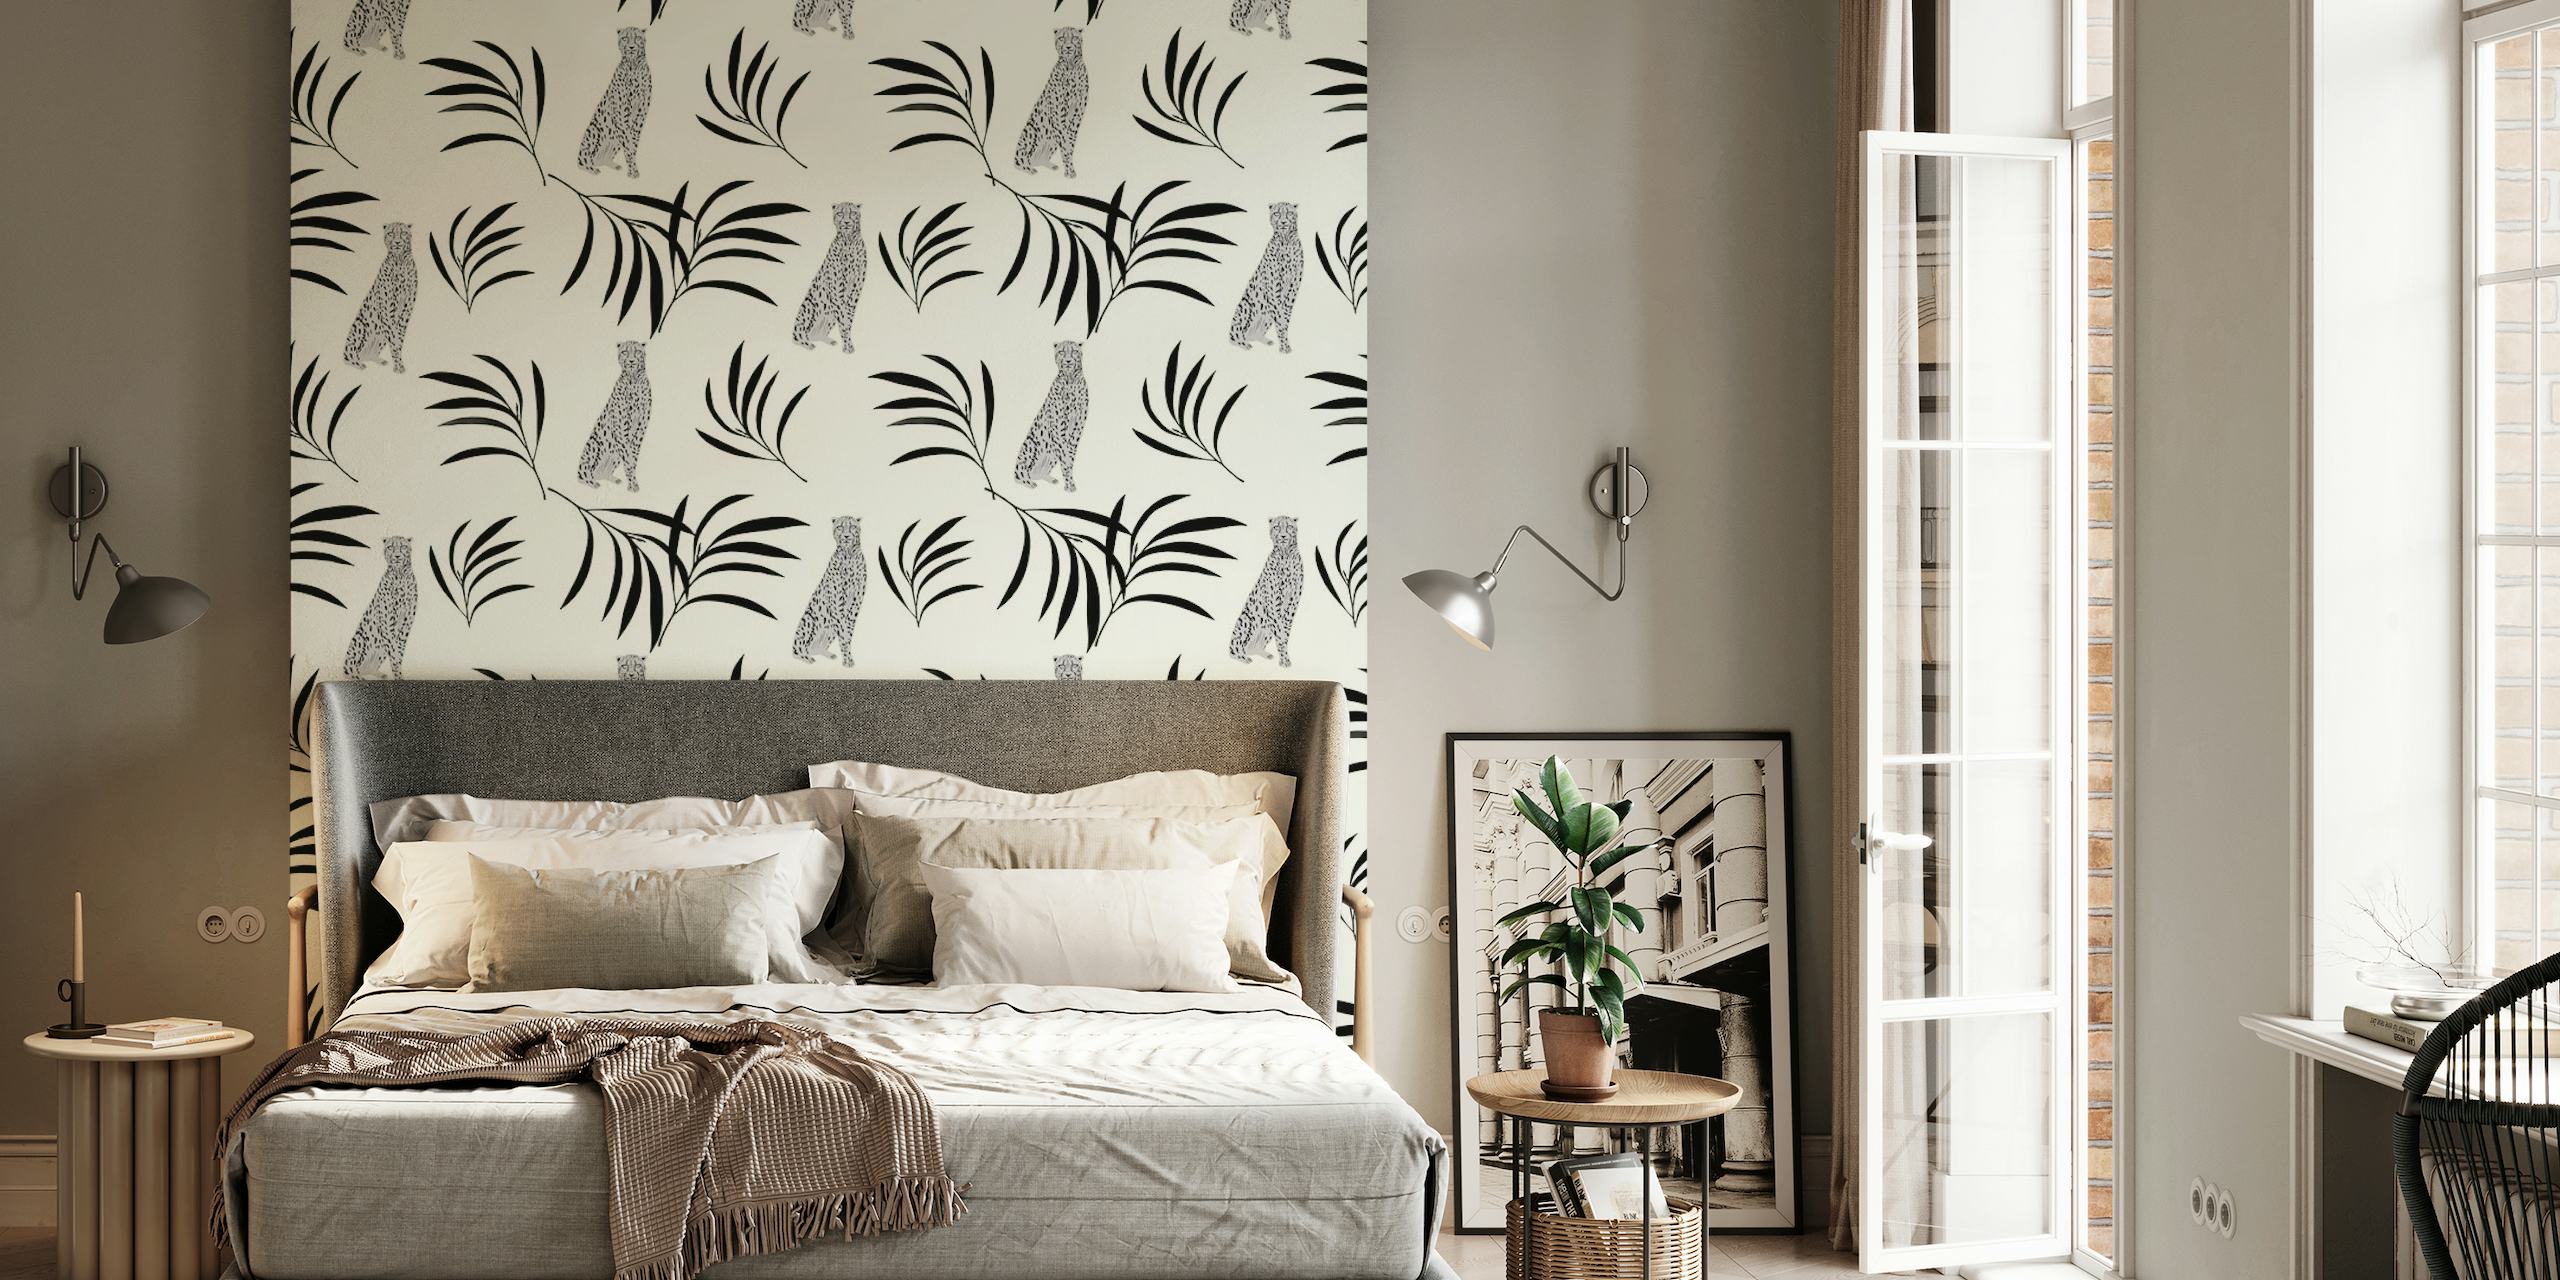 Cheetah and Eucalyptus pattern wall mural on a neutral background.